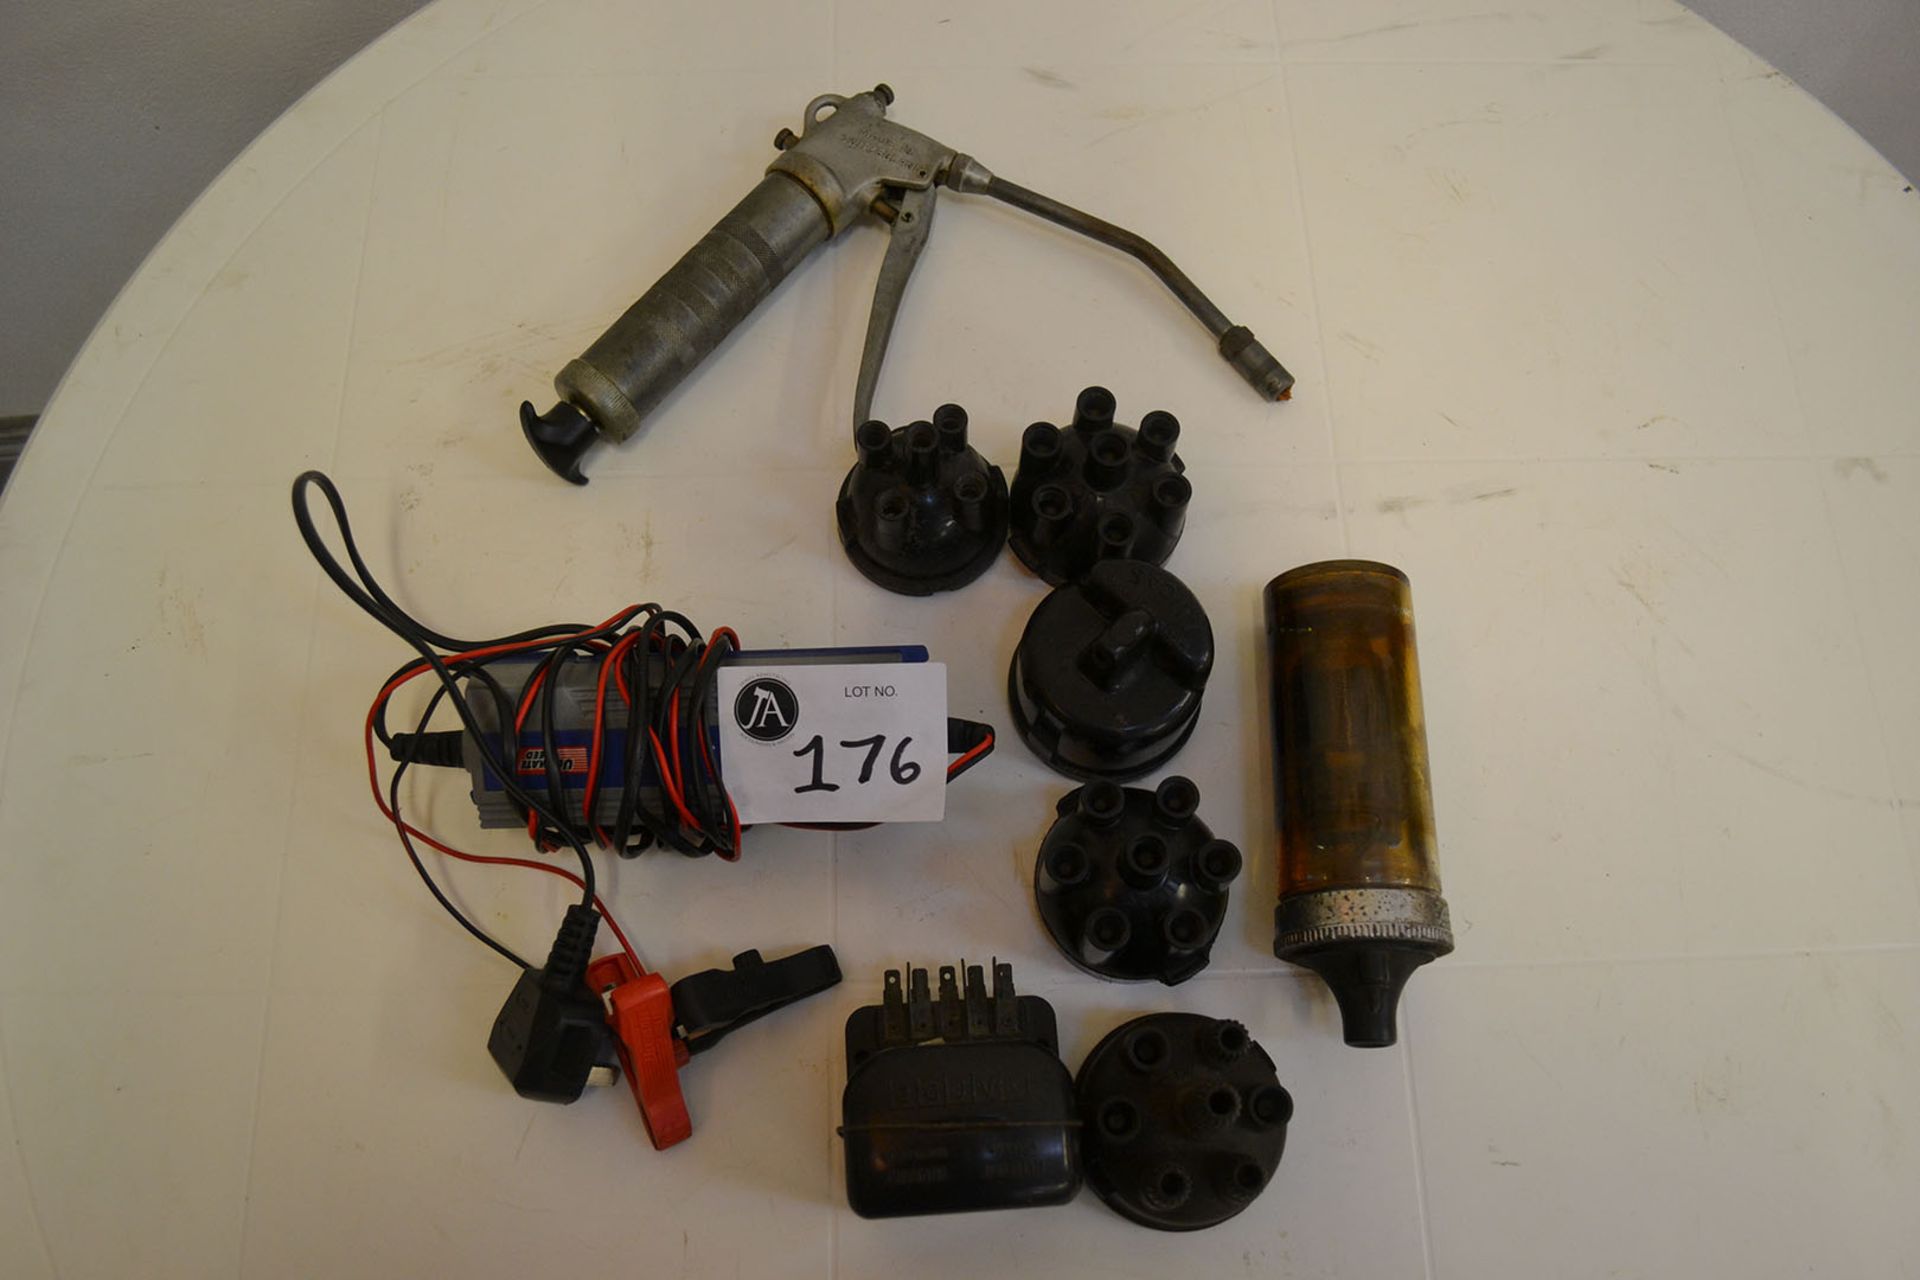 Battery charger, distributor caps and assorted components